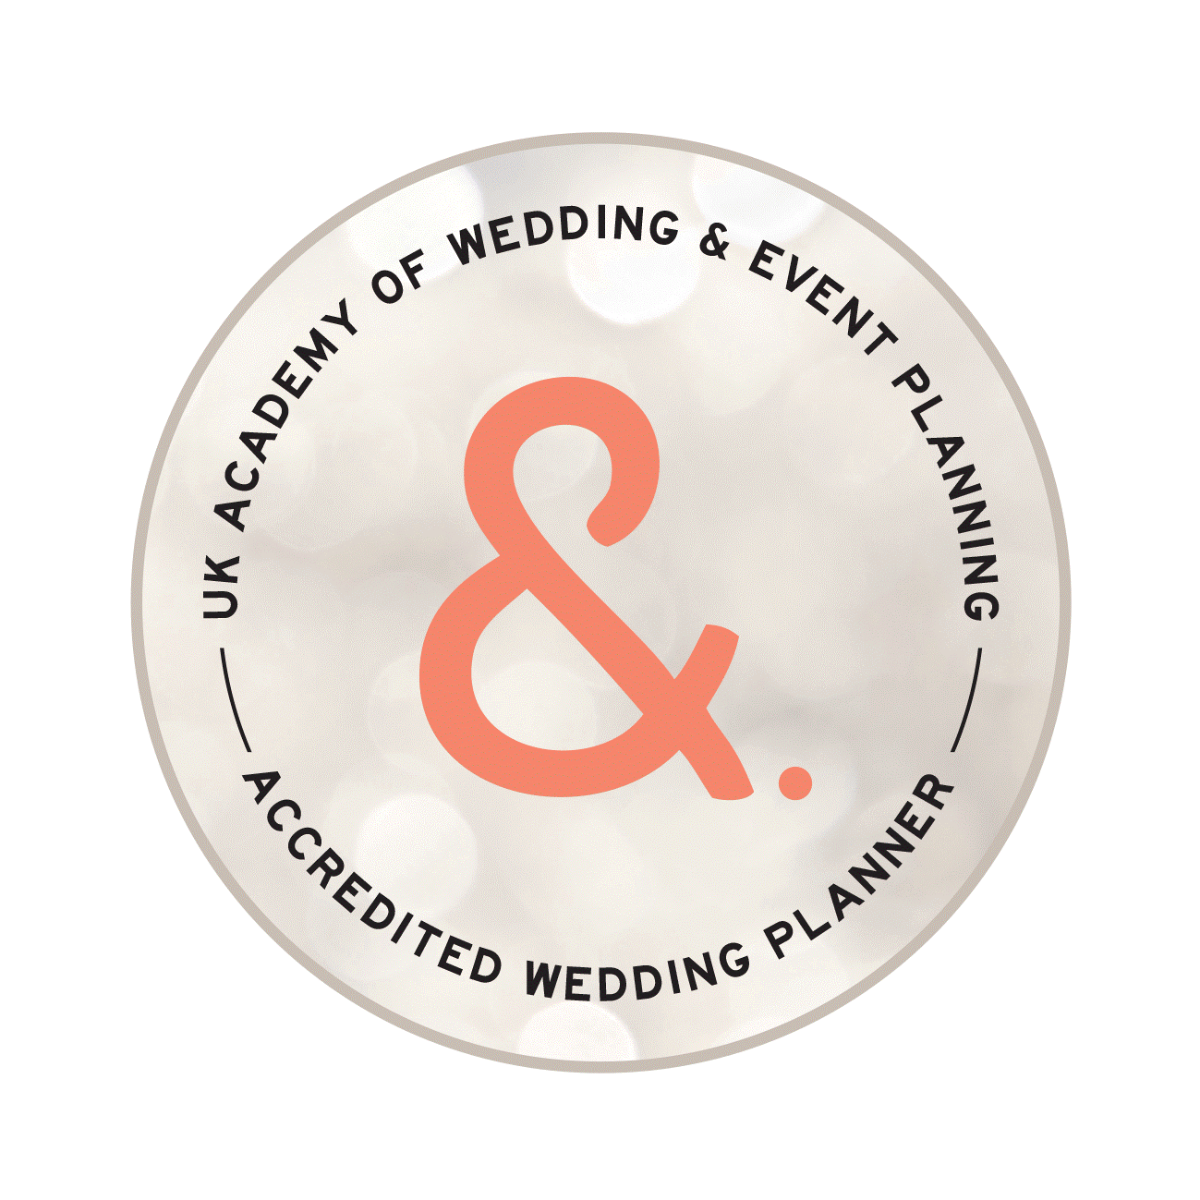 Accredited Wedding & Event Planner with the UK Academy of Wedding & Event Planning